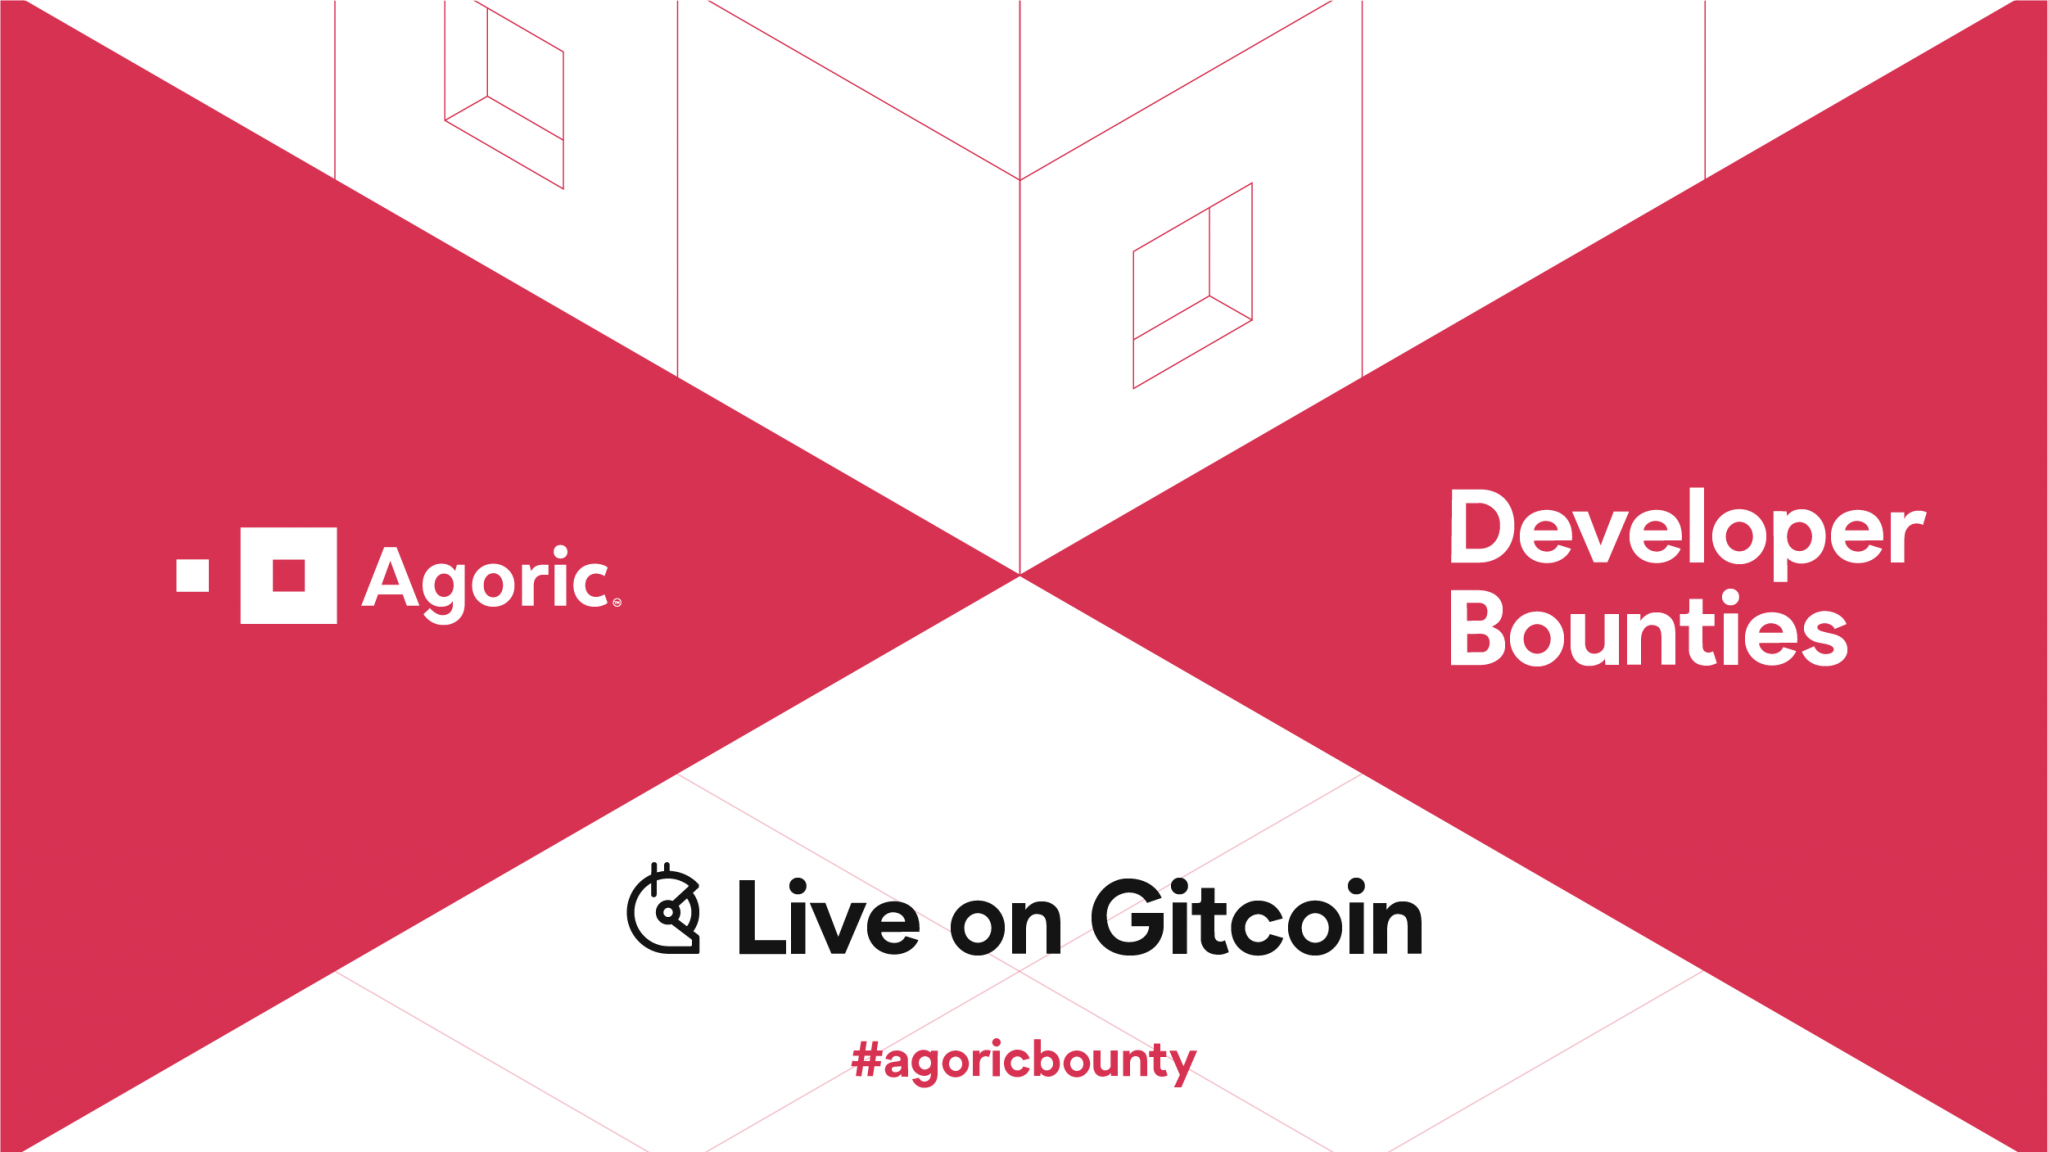 Developer Bounties Are Yours for the Coding!